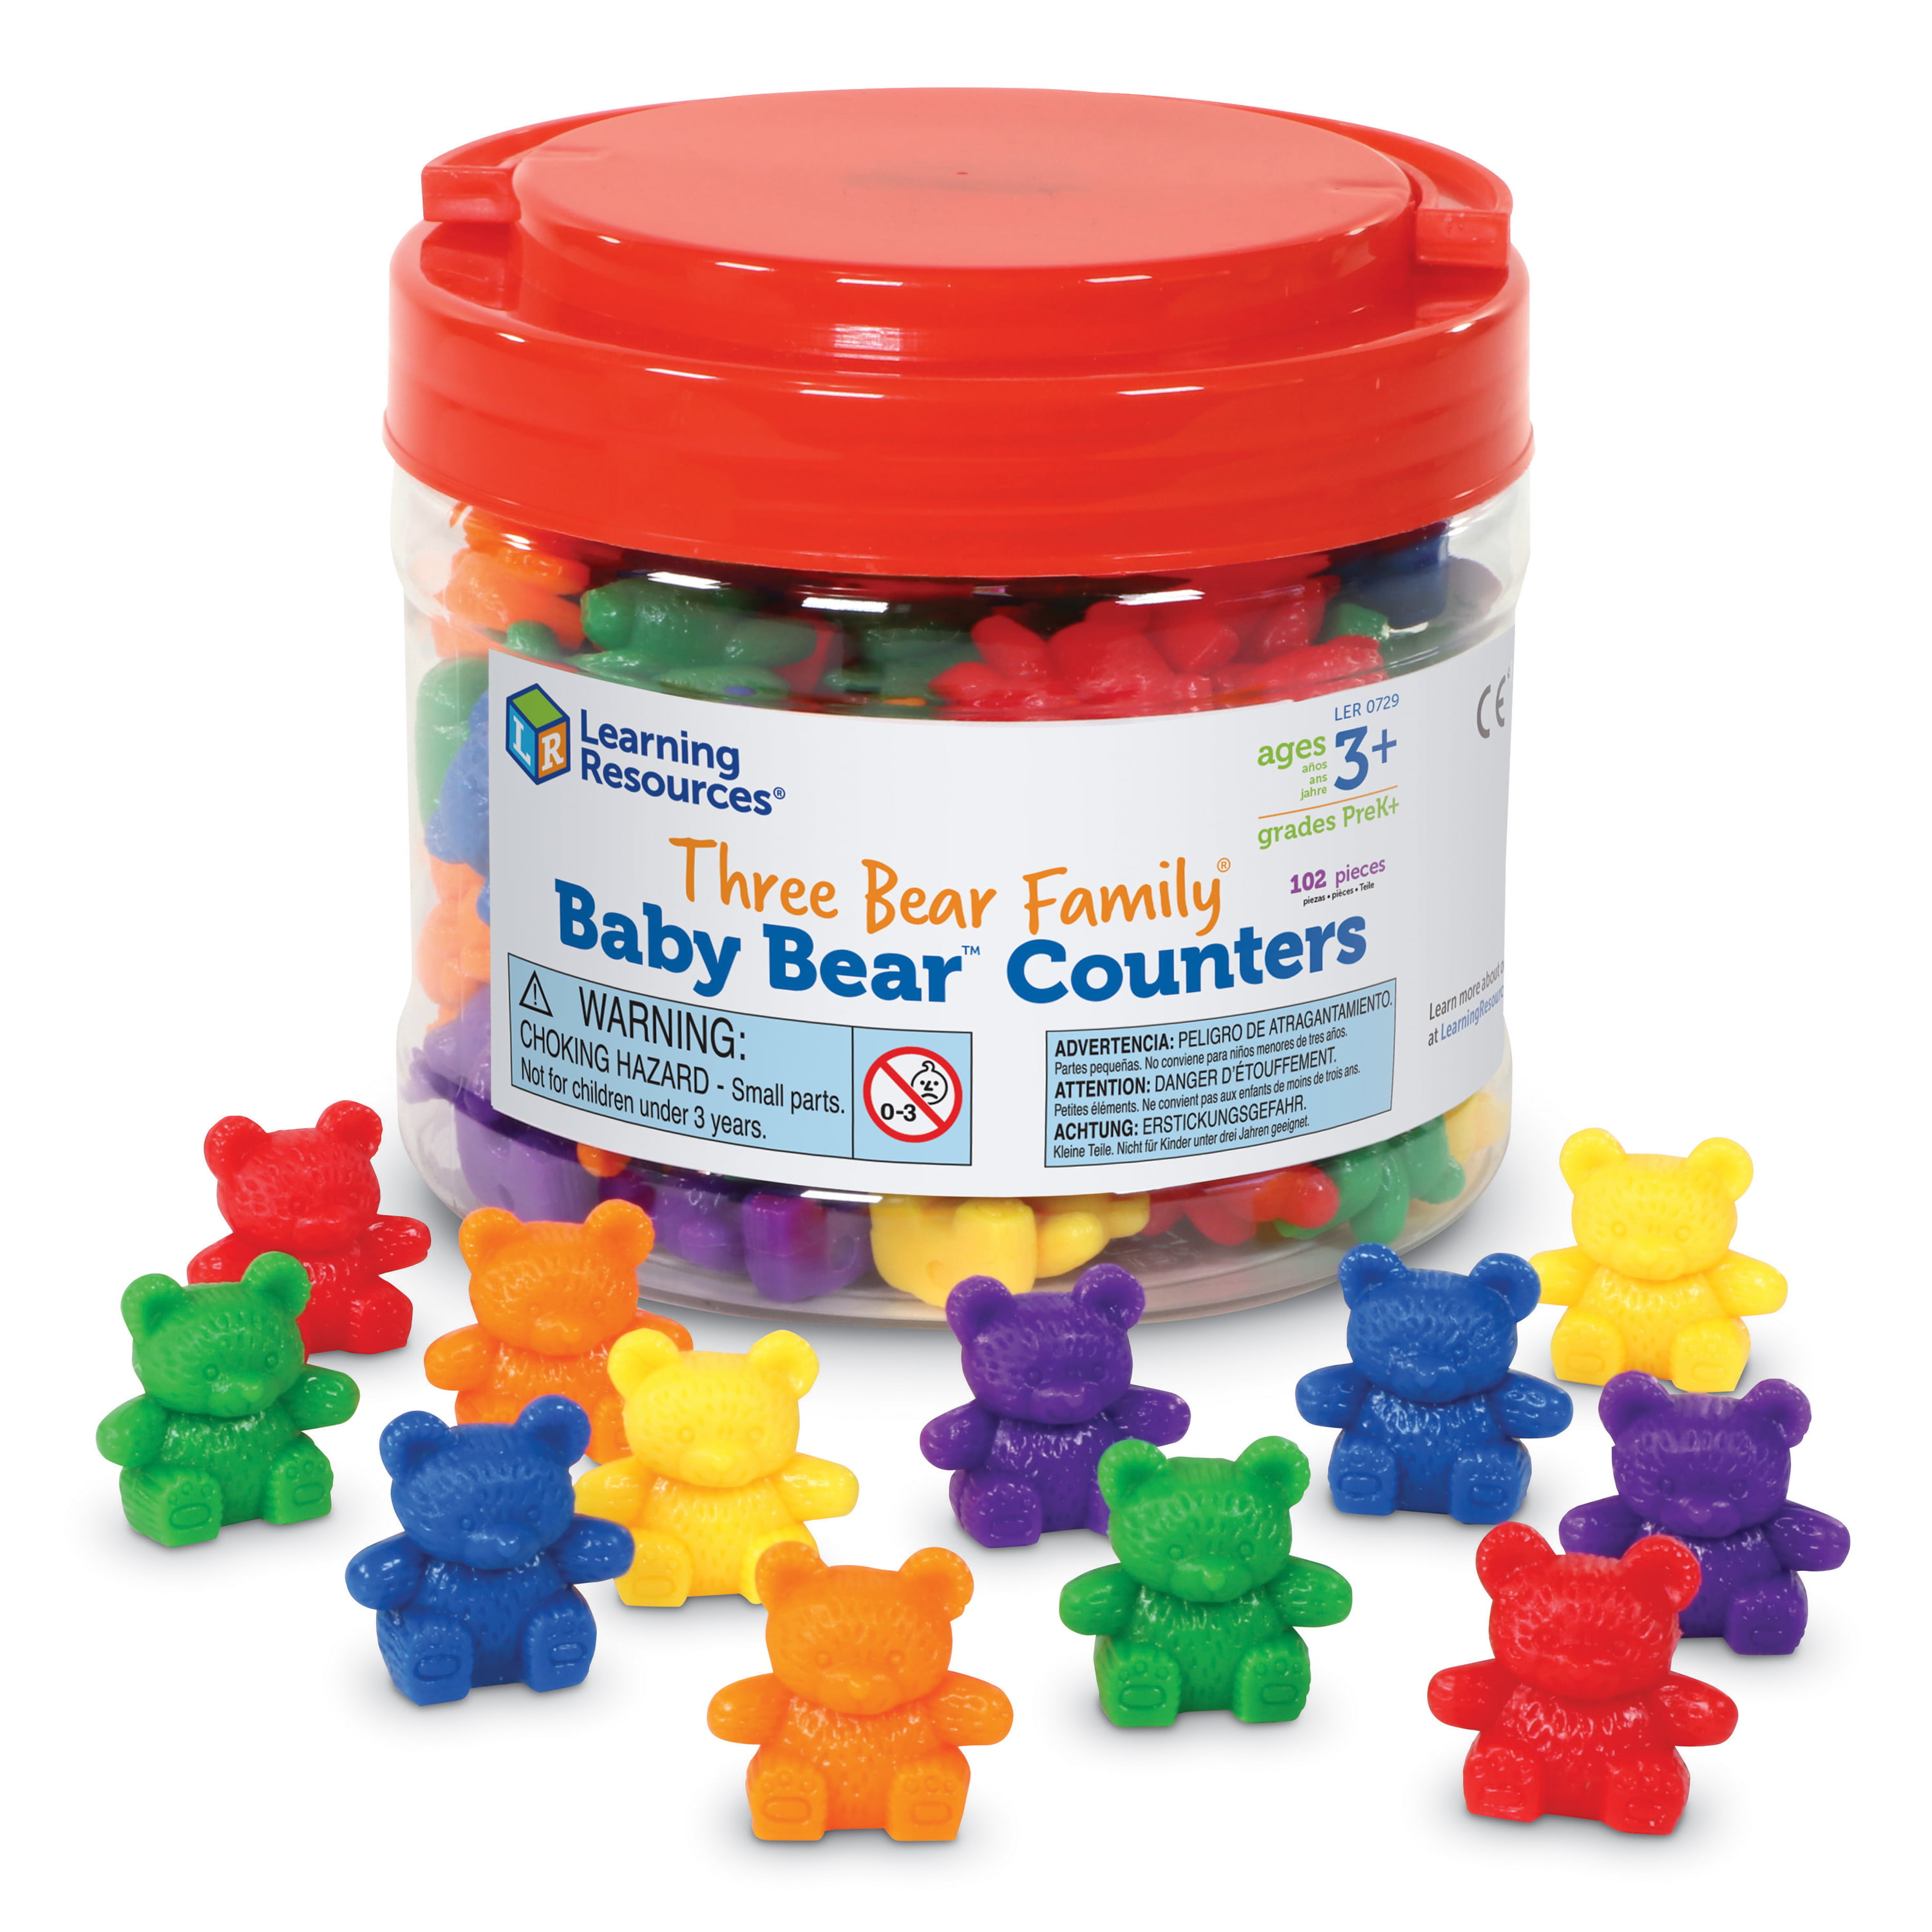 Red and Yellow Counters Jar Of 200 Primary Teacher Resources Learning Kids 